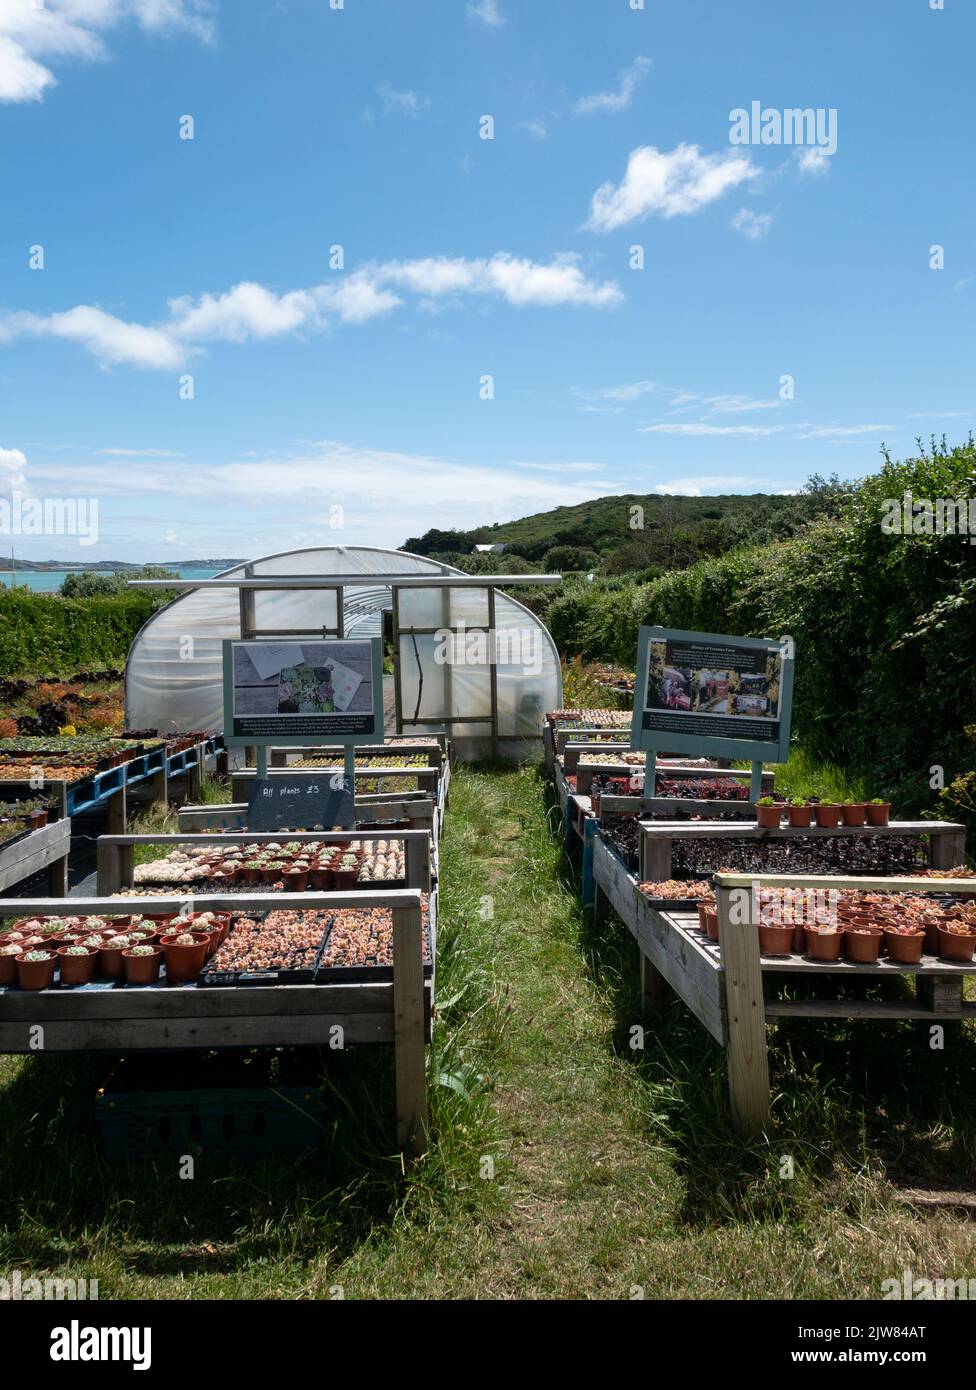 Veronica Farm, Bryher, Isles of Scilly, Cornwall, England, UK. Stock Photo